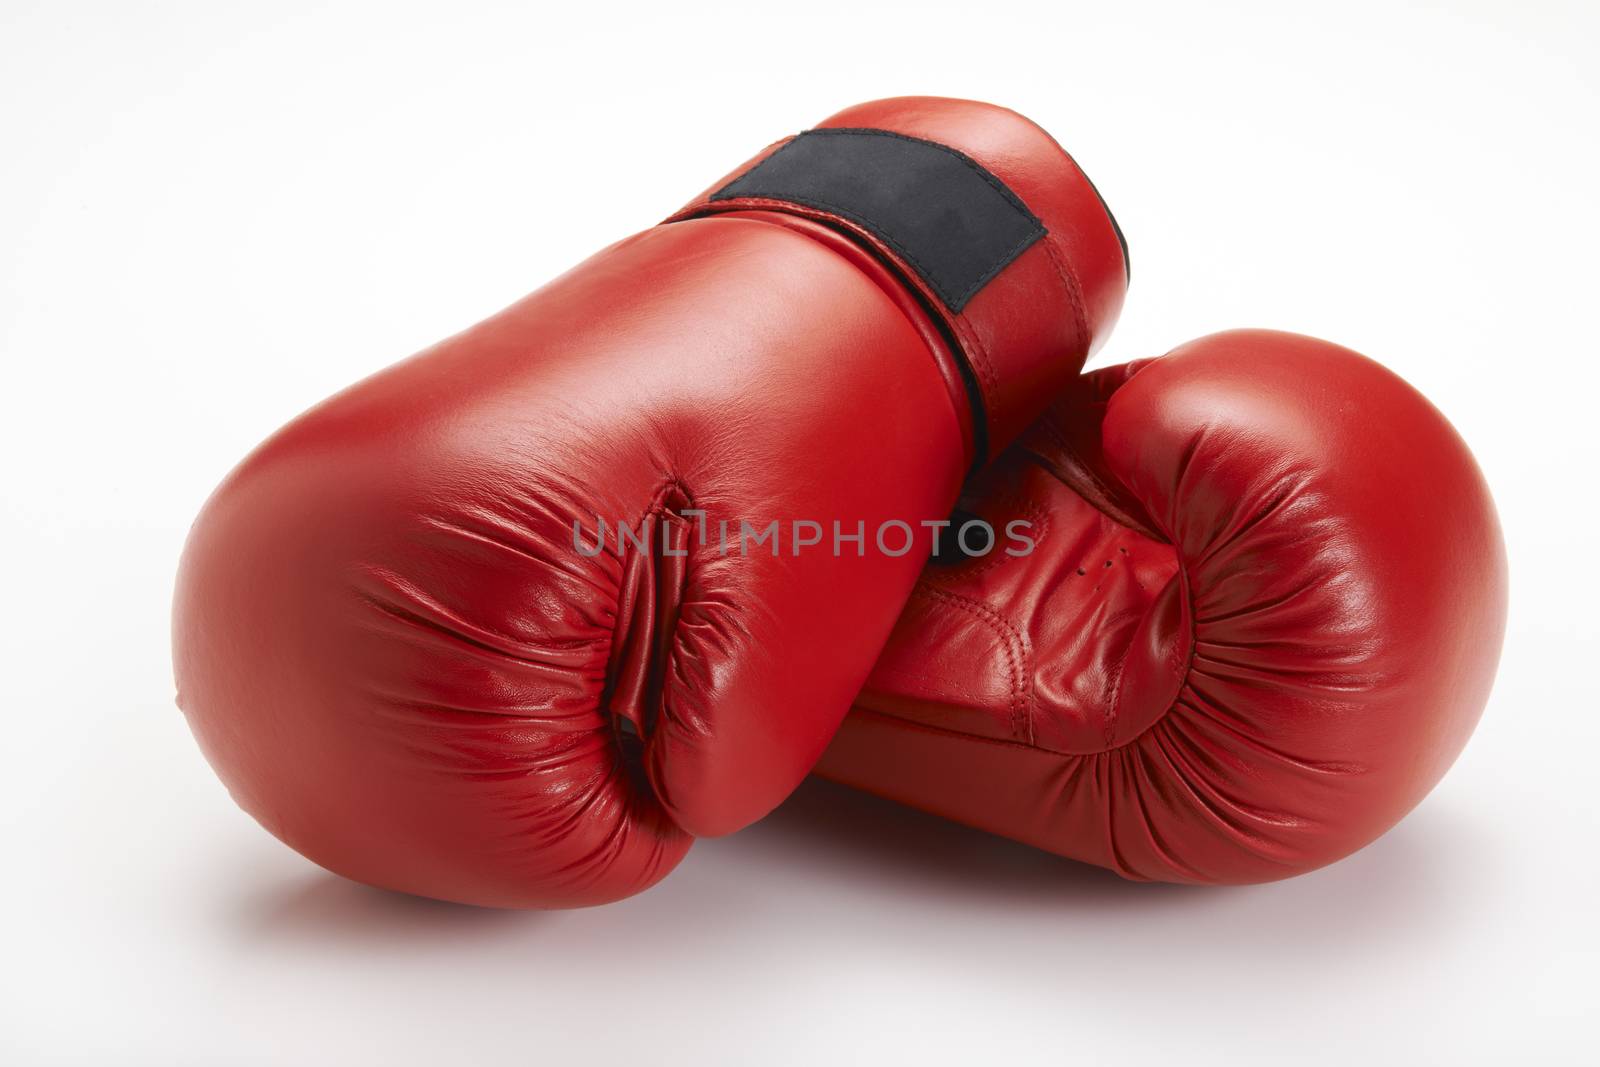 Pair of red boxing gloves isolated on white background